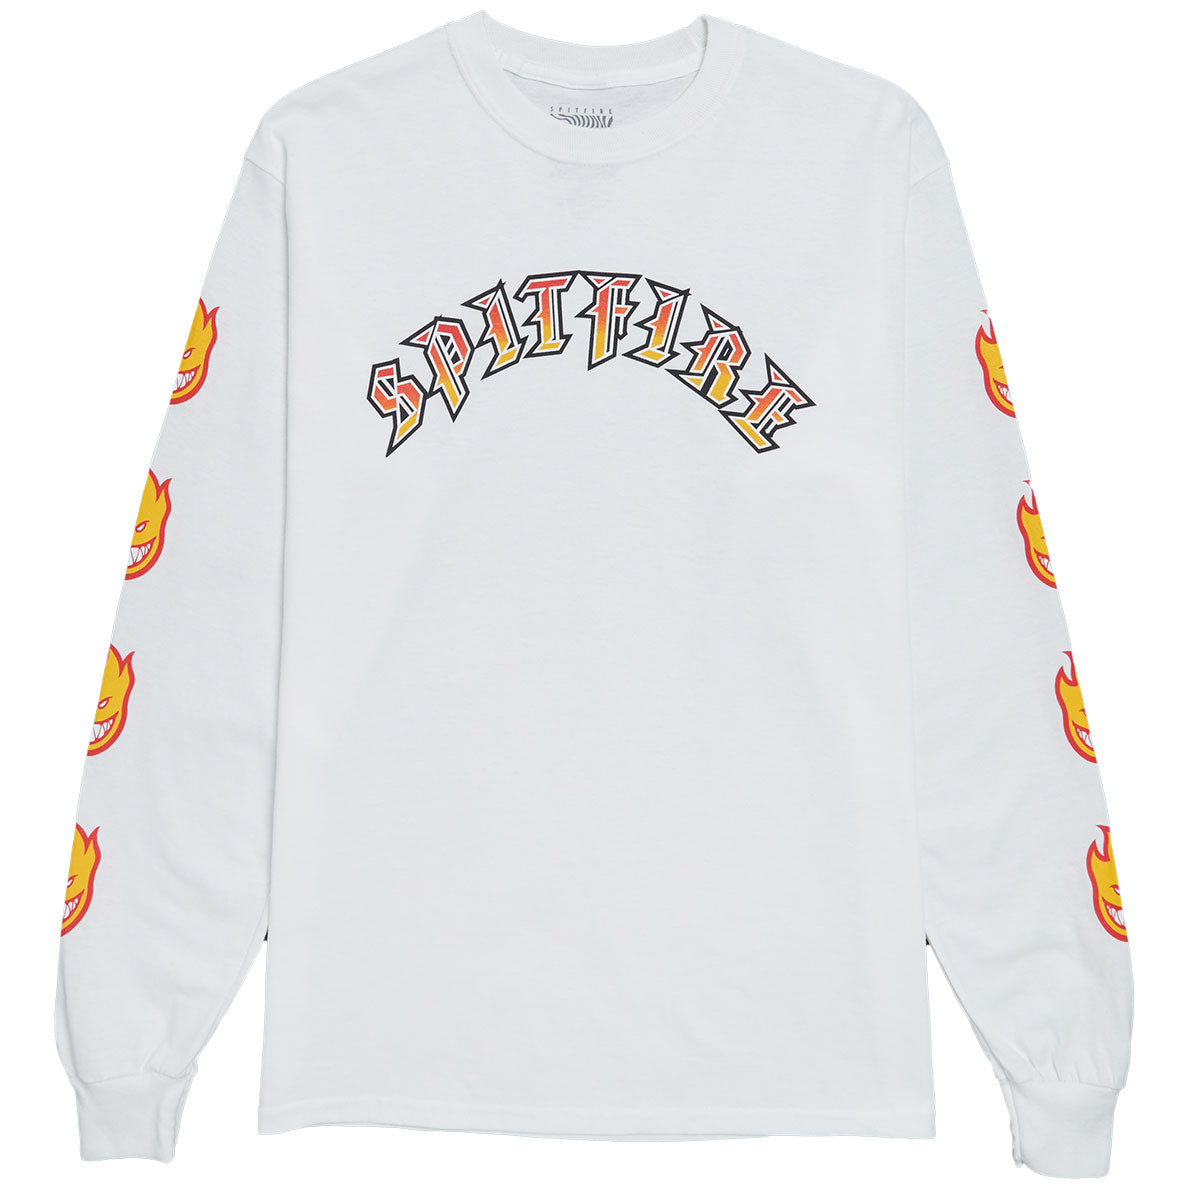 Spitfire Old E Bighead Fill Sleeve Long Sleeve T-Shirt - White/Gold/Red image 1